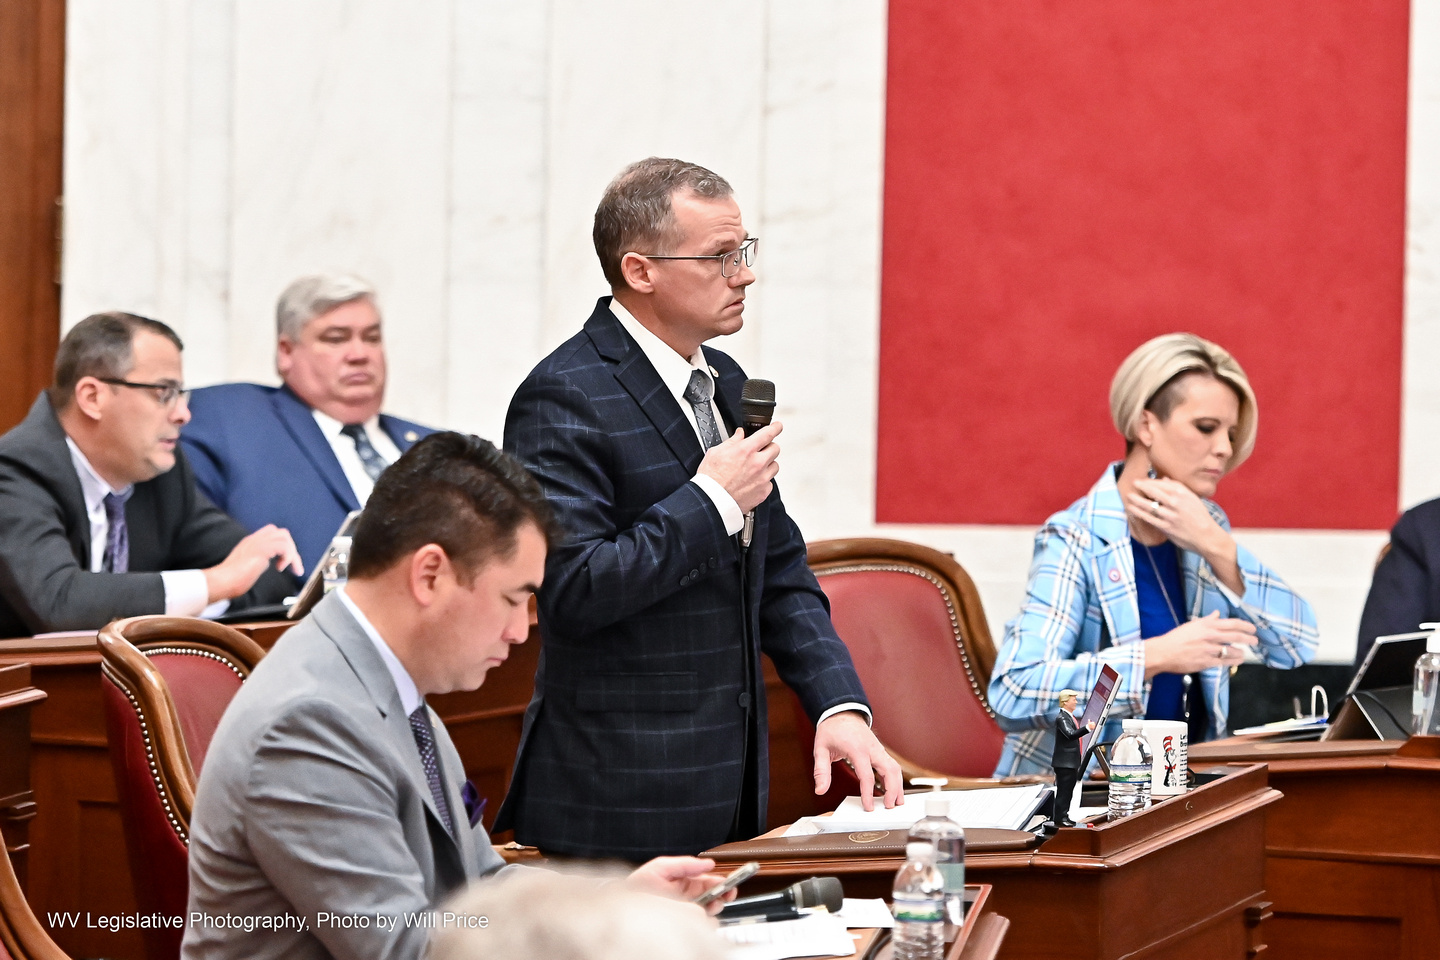 Sen. Eric Tarr stands on the Senate floor wearing a dark suit and holding a microphone up to speak while others around him sit